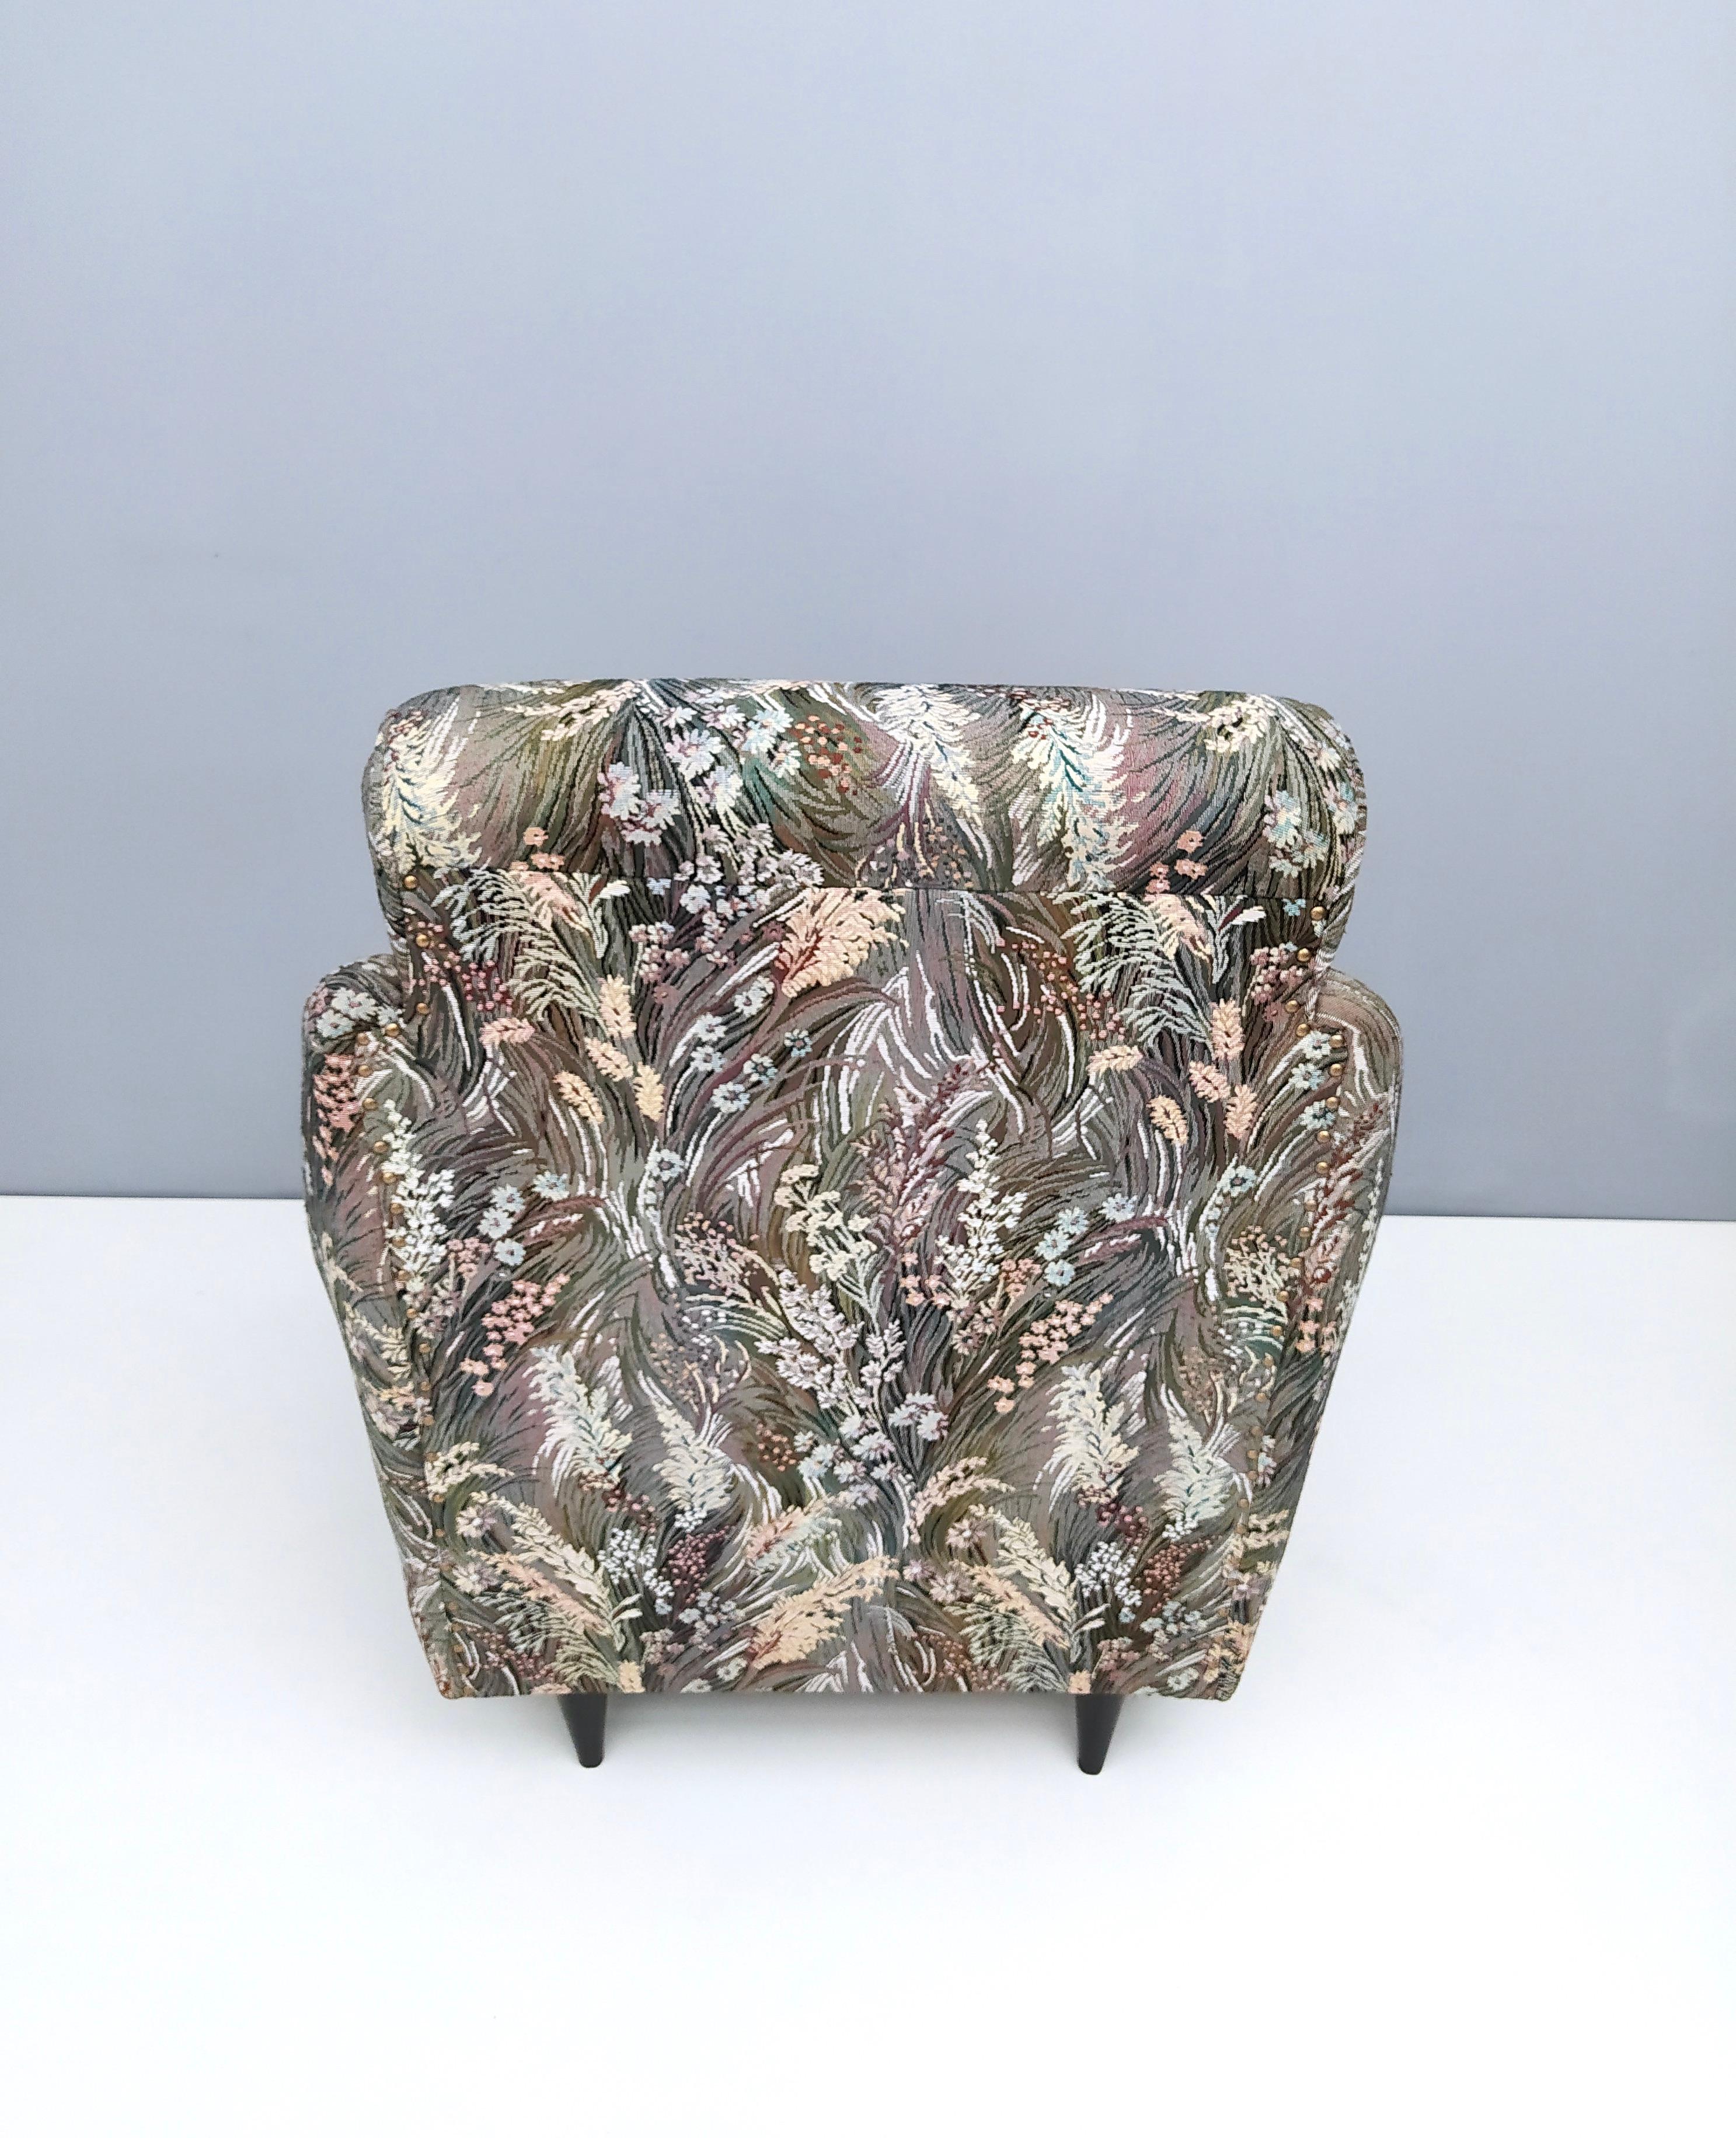 Mid-20th Century Pair of Vintage High-Quality Patterned Fabric Armchairs, Italy For Sale